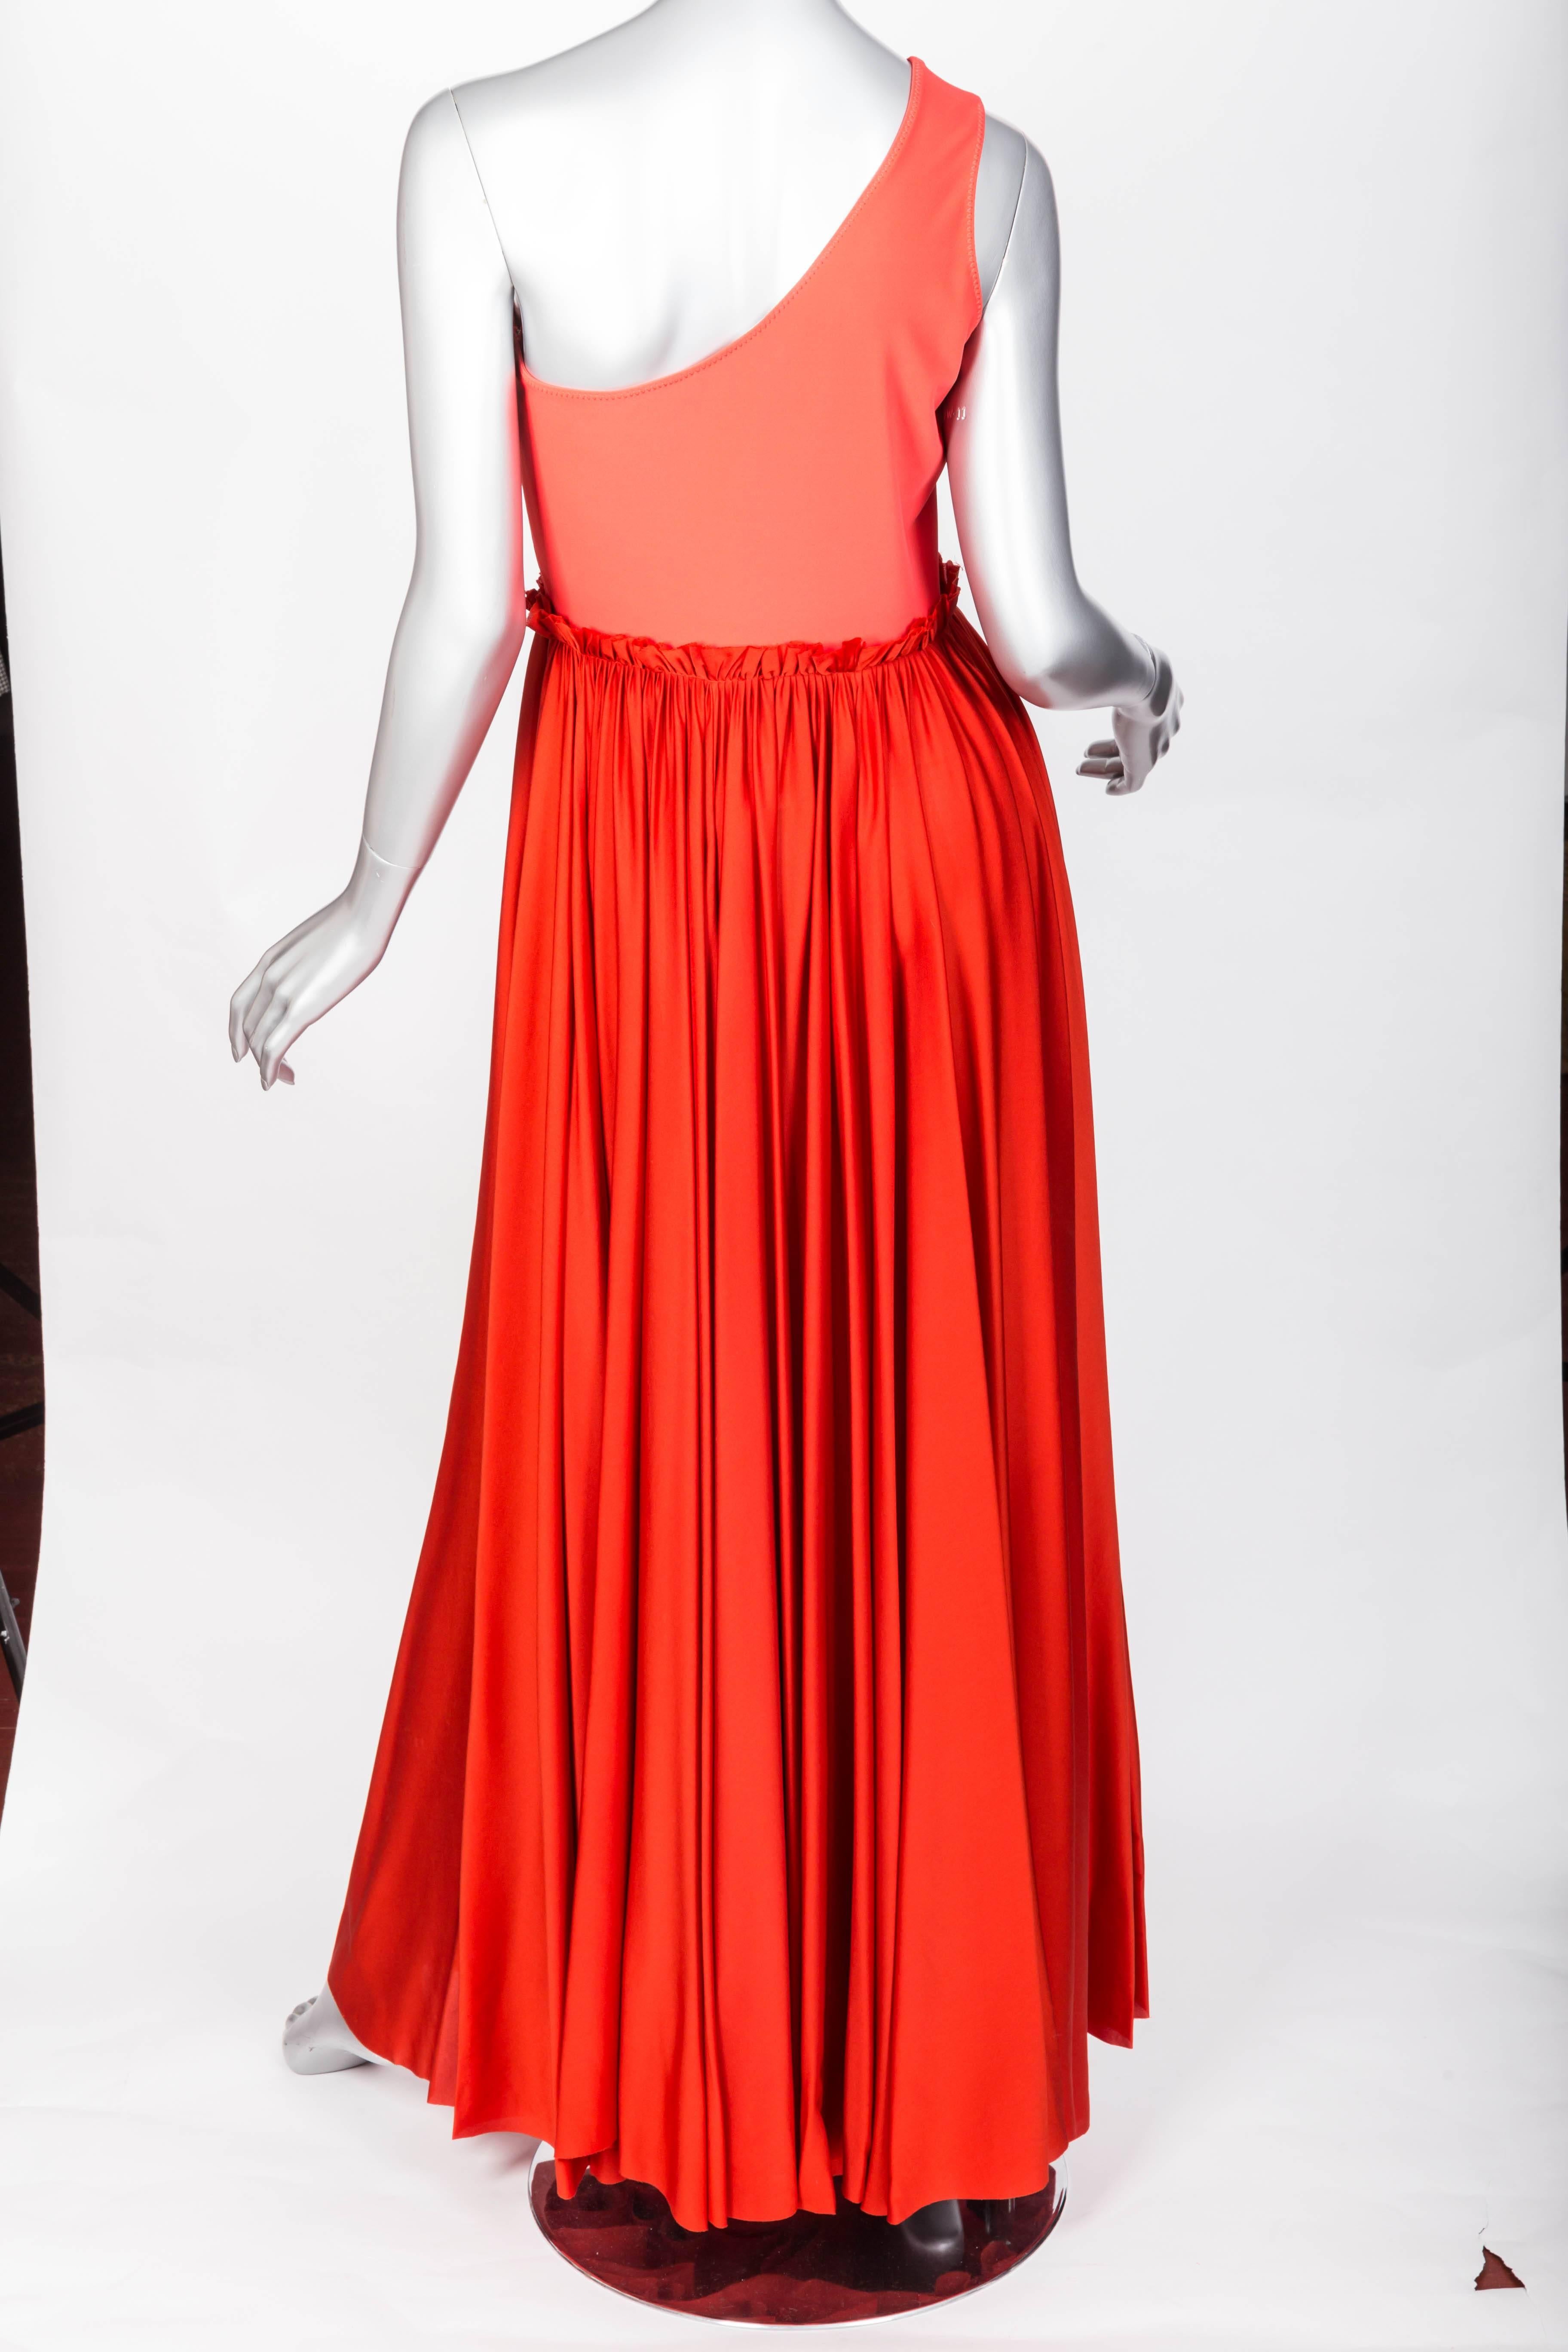 Stunning Lanvin gown with size zip and gathered detail where the top of this dress meets the flowing silk bottom of this gown.
Length is 57.5 inches
Condition is excellent.
